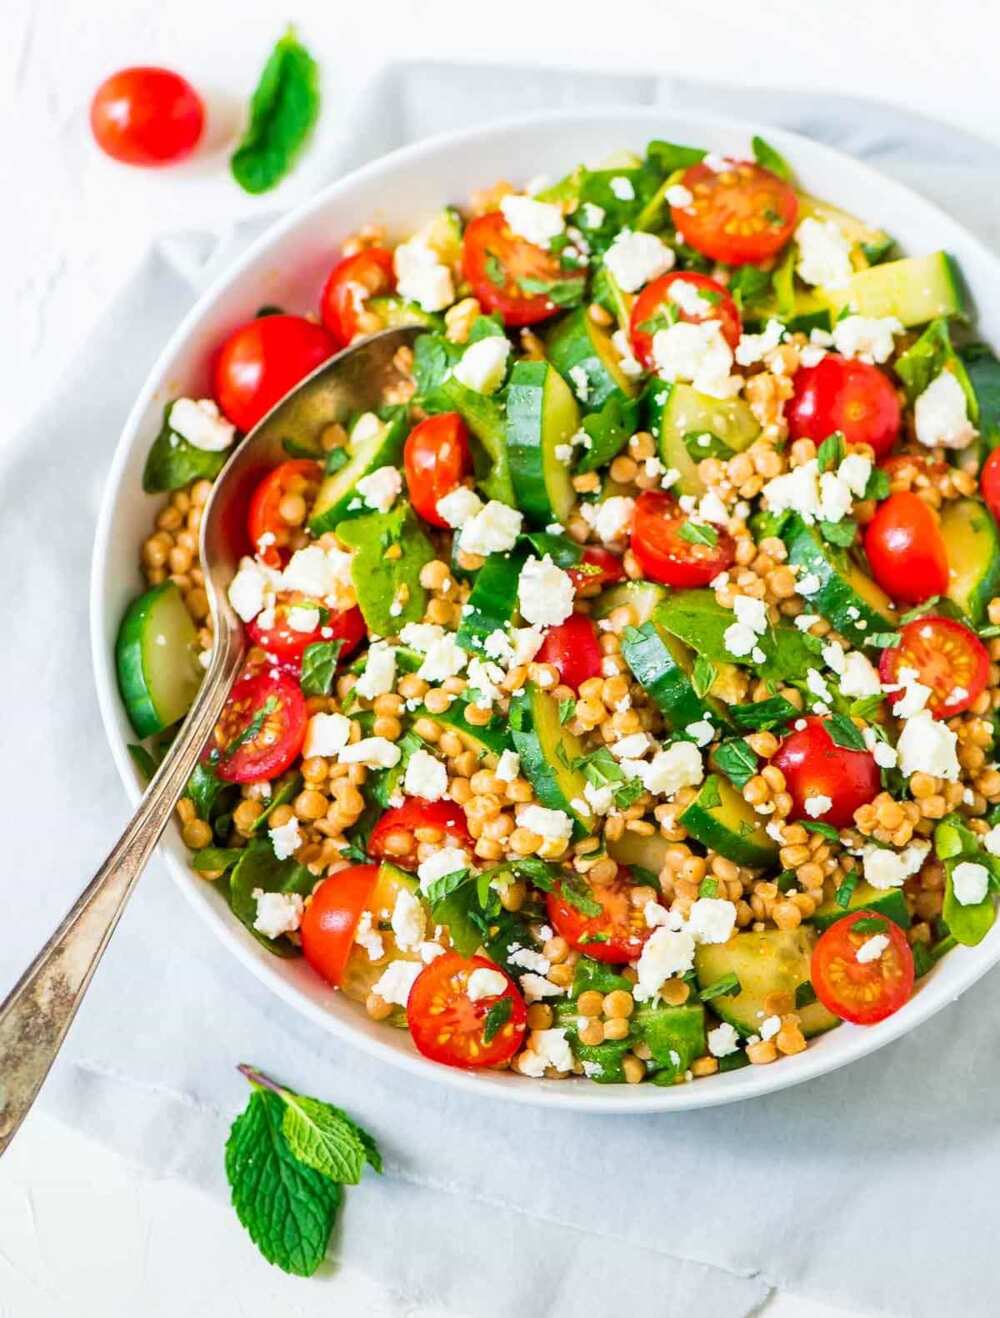 Salad with couscous